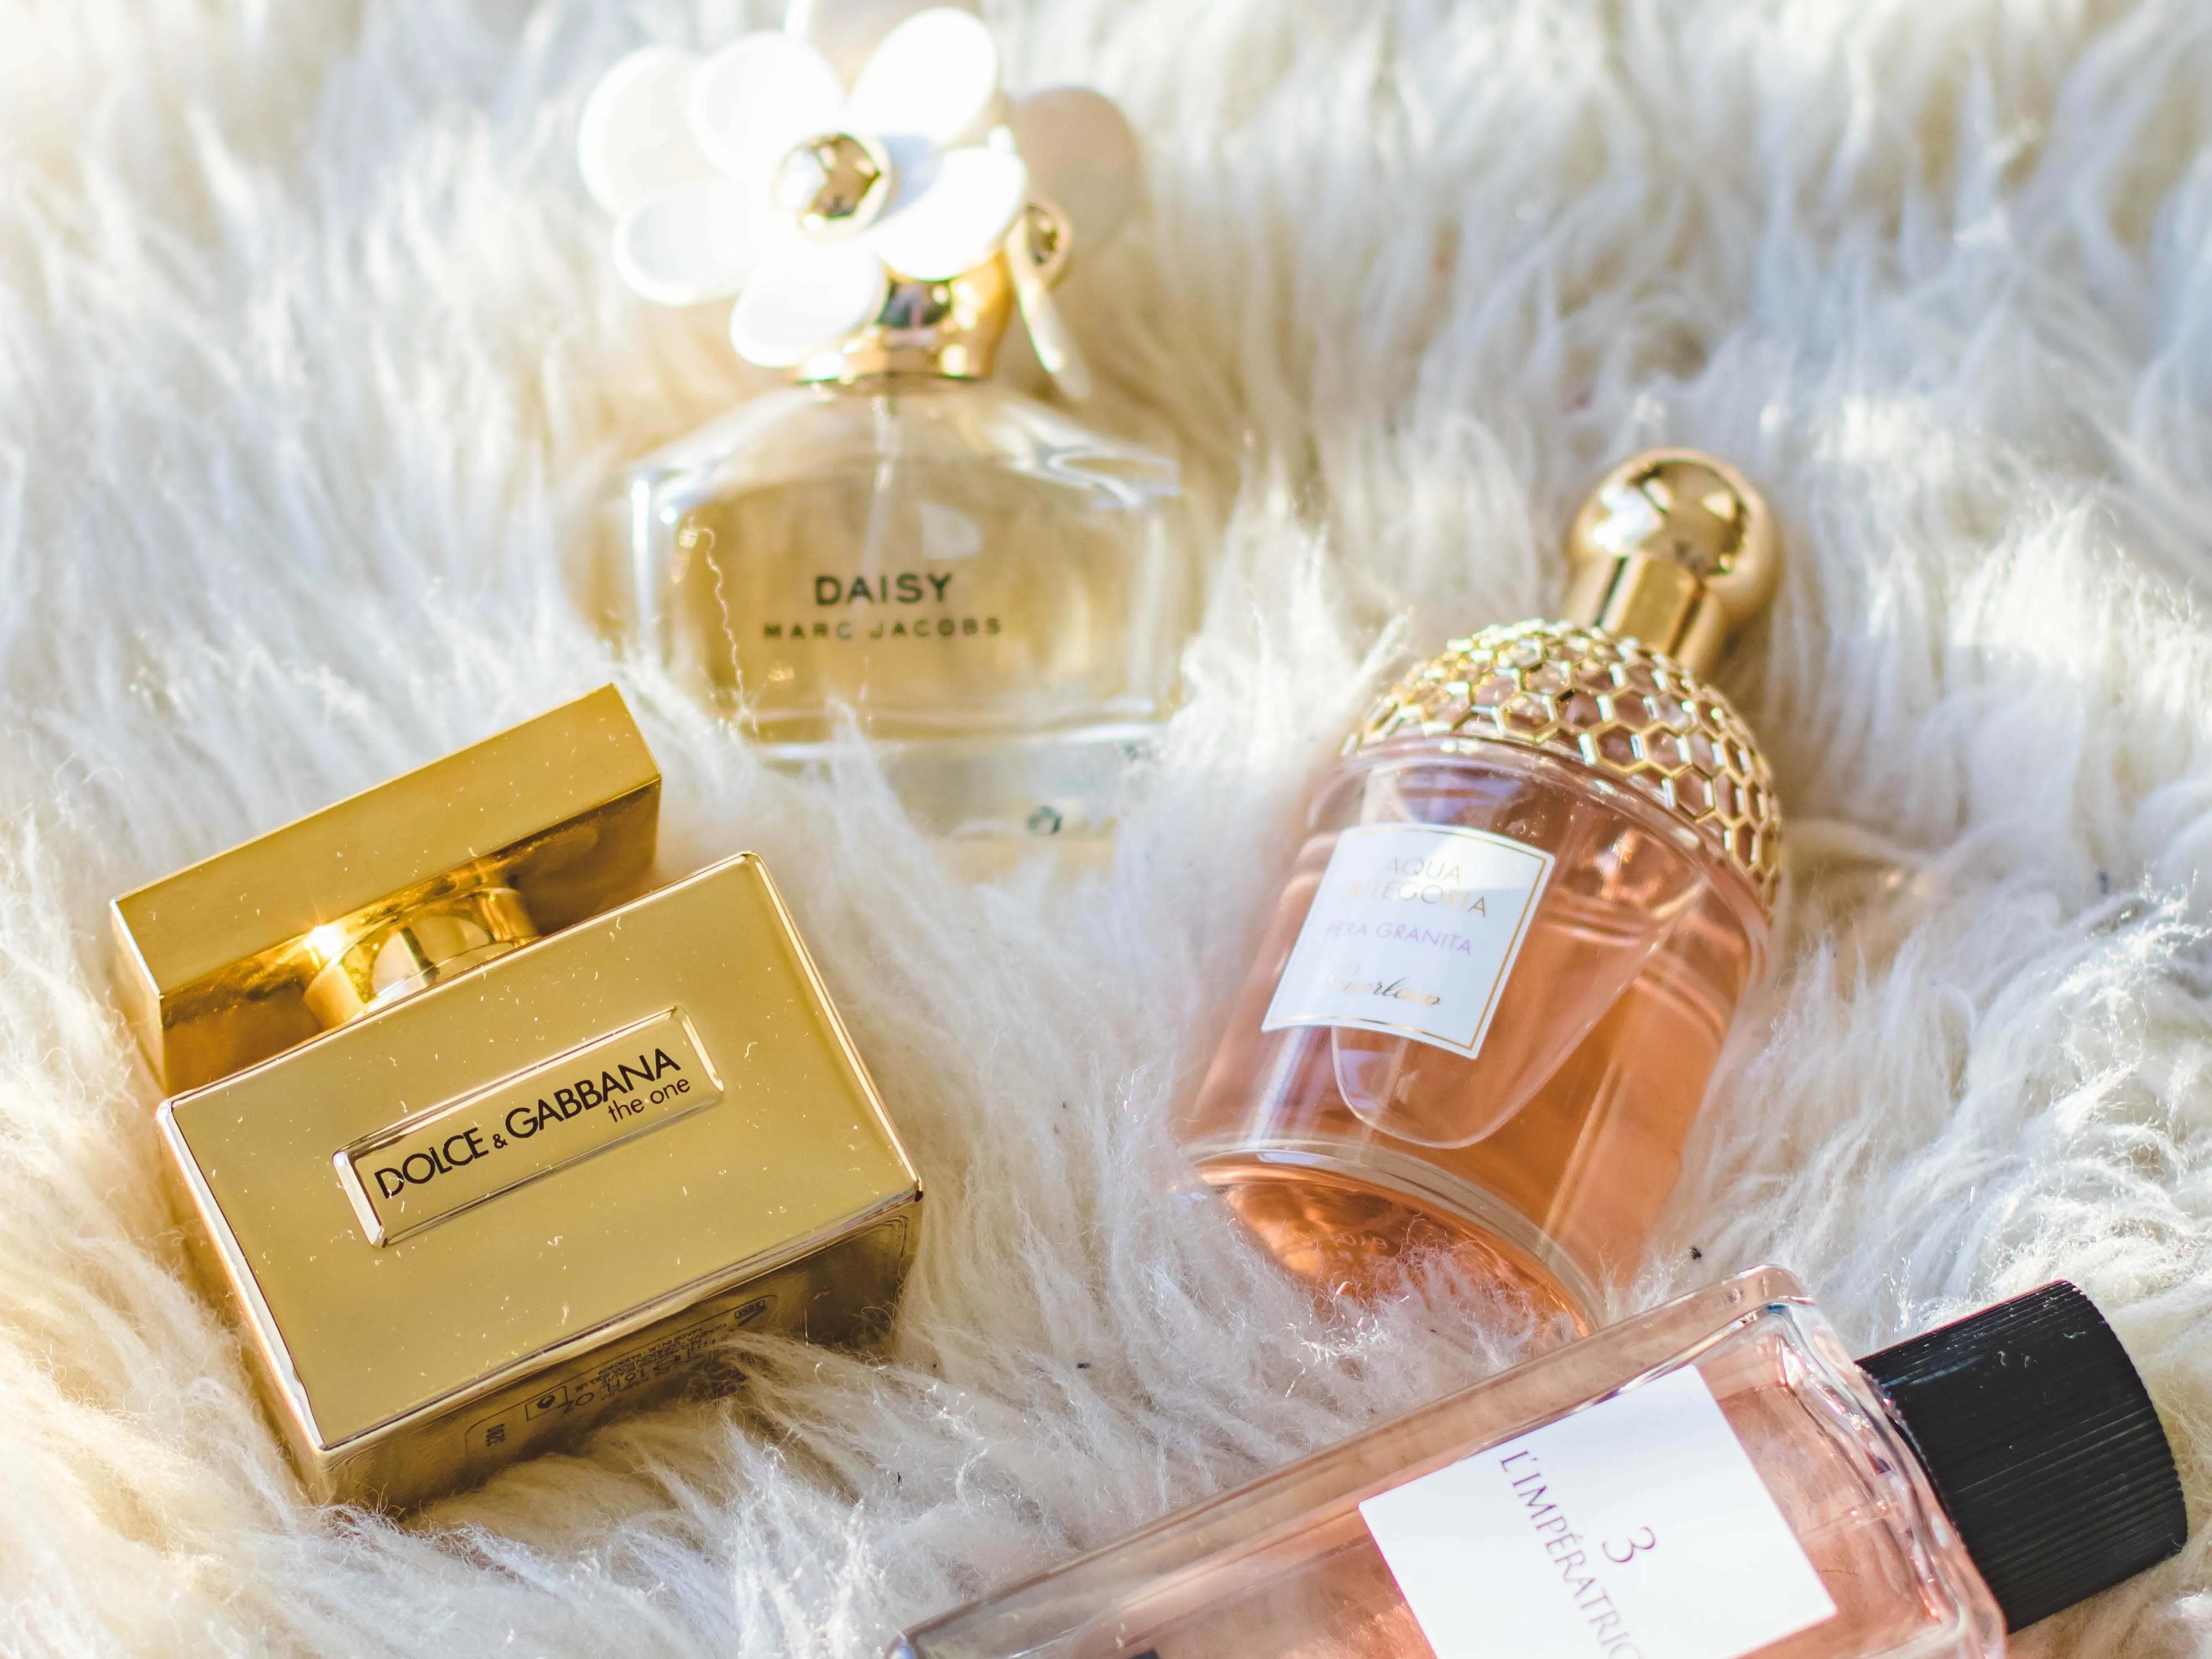 Full-Size vs Travel-Size which Perfume Size should you buy